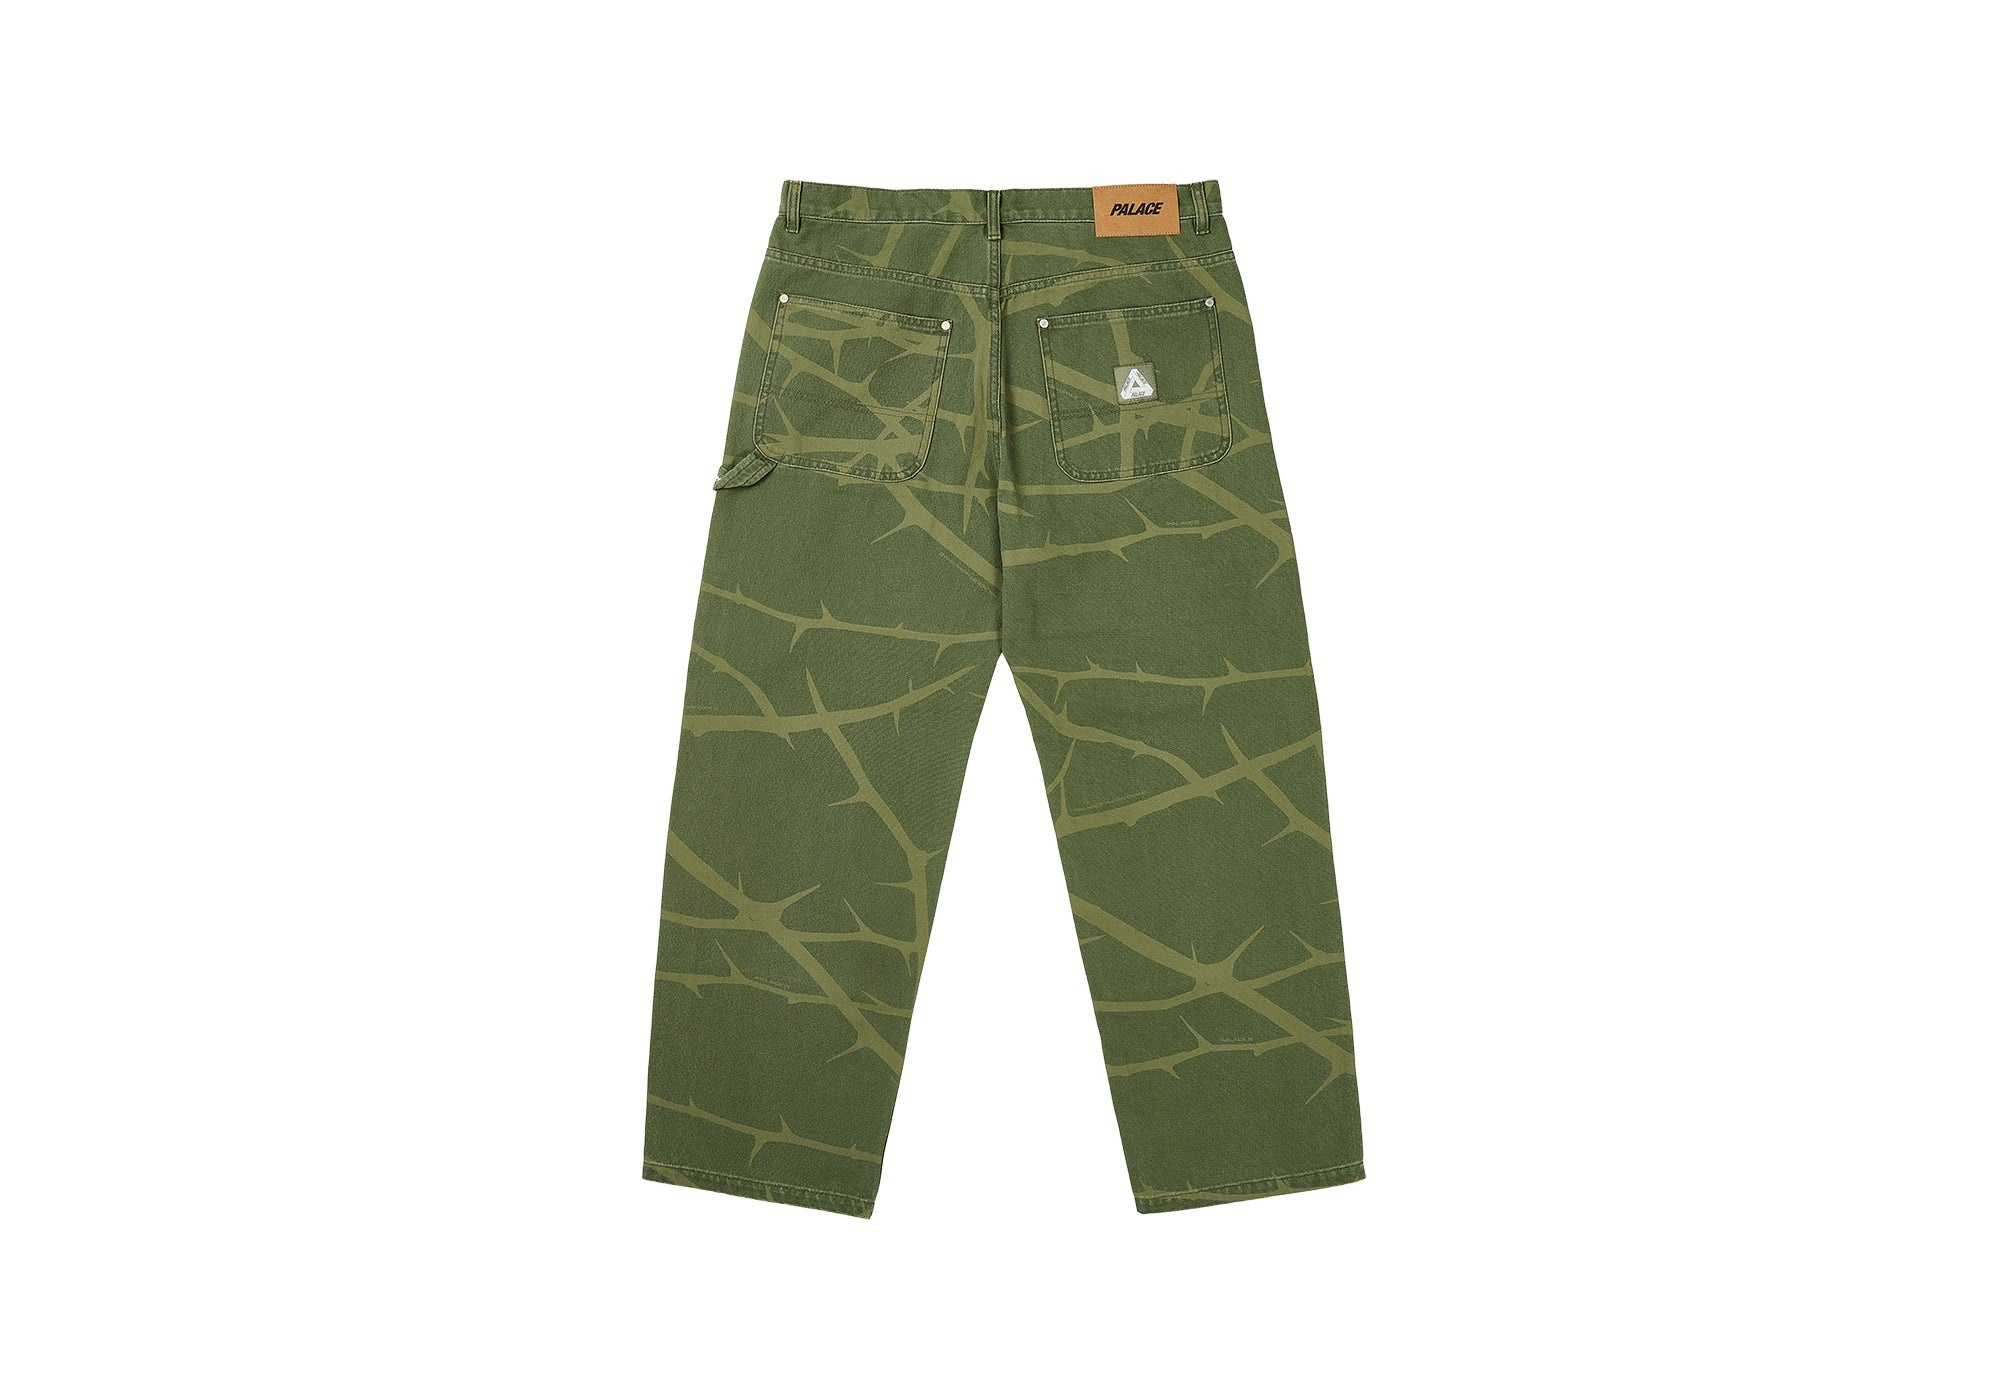 HEAVY CANVAS WORK PANT THE DEEP GREEN - 2